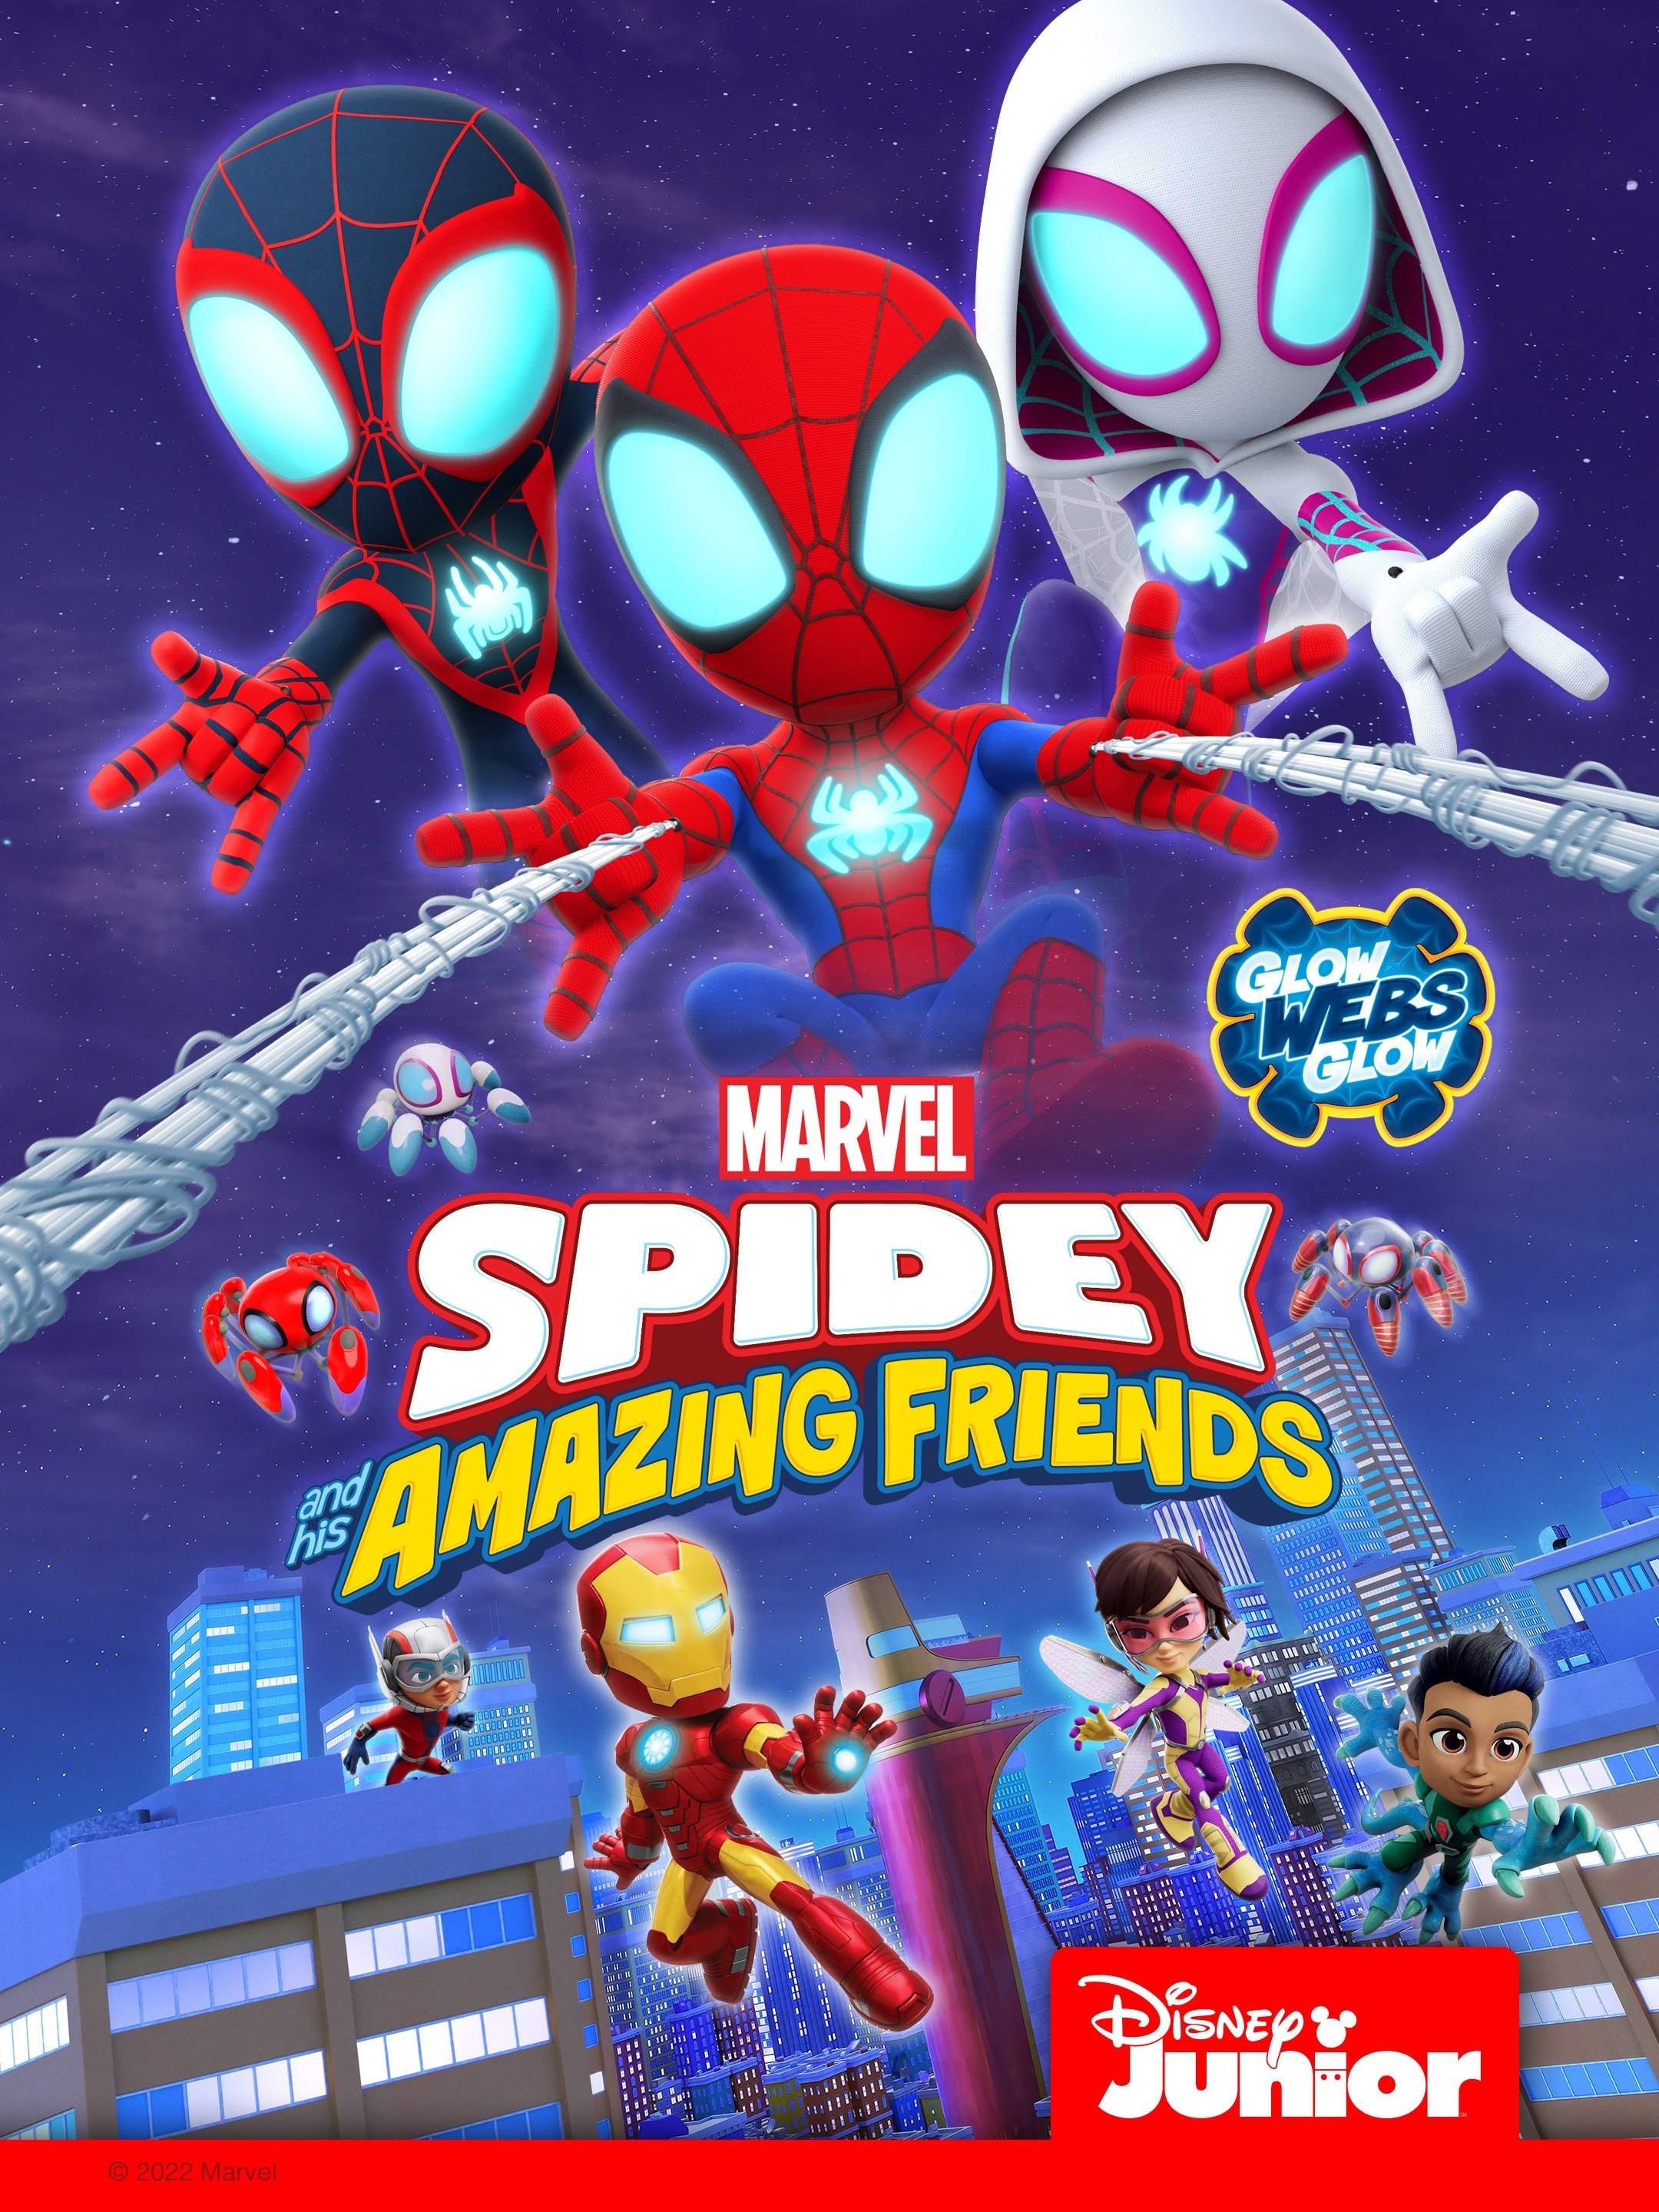 Marvel's 'Spidey and his Amazing Friends' Swings into a Third Season